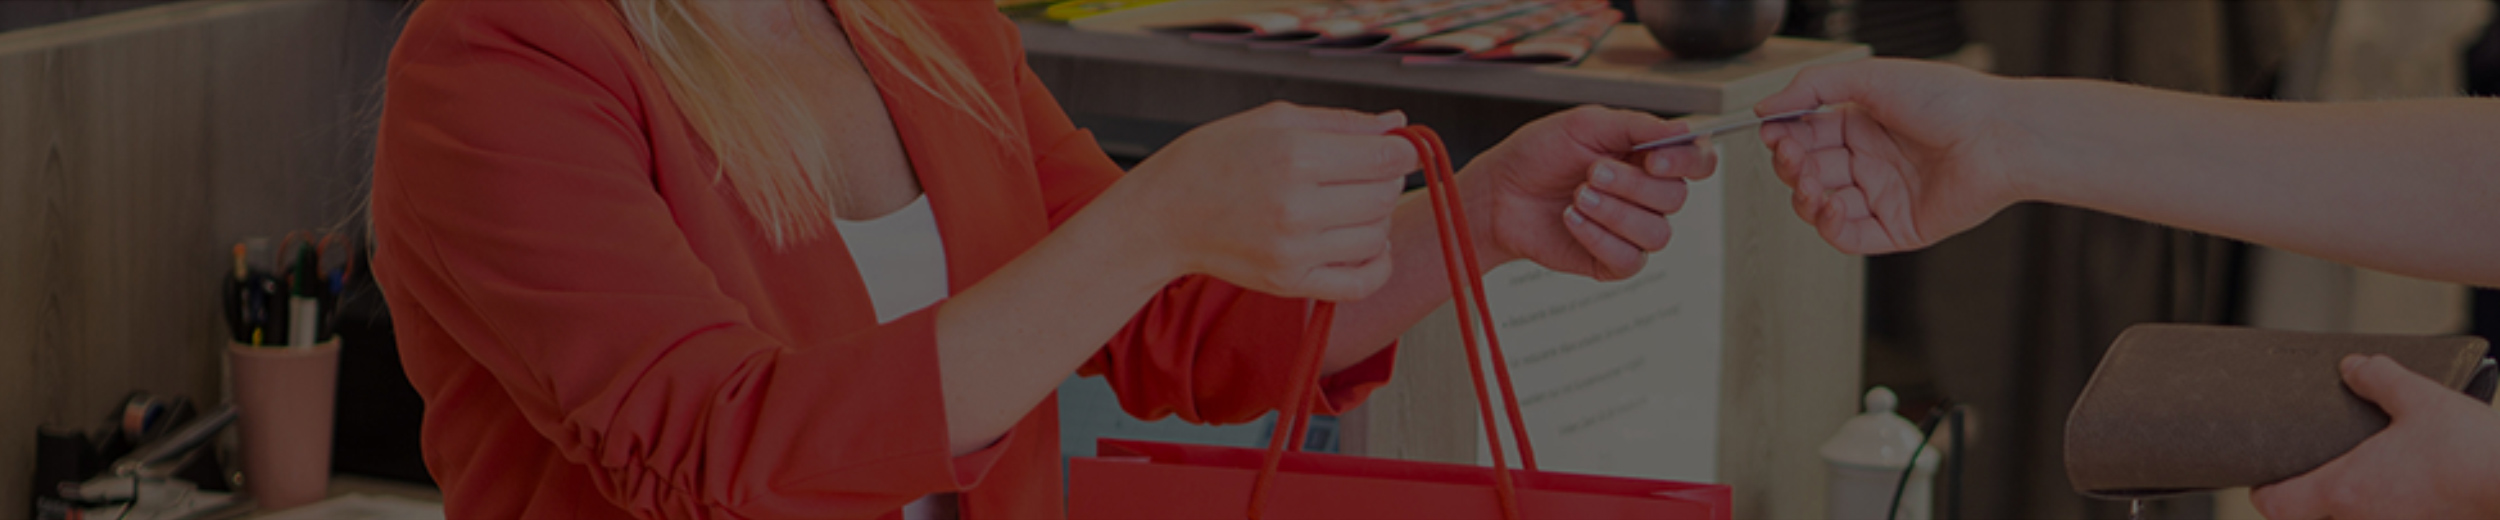 Woman In Red Shirt Holding A Red Shopping Bag